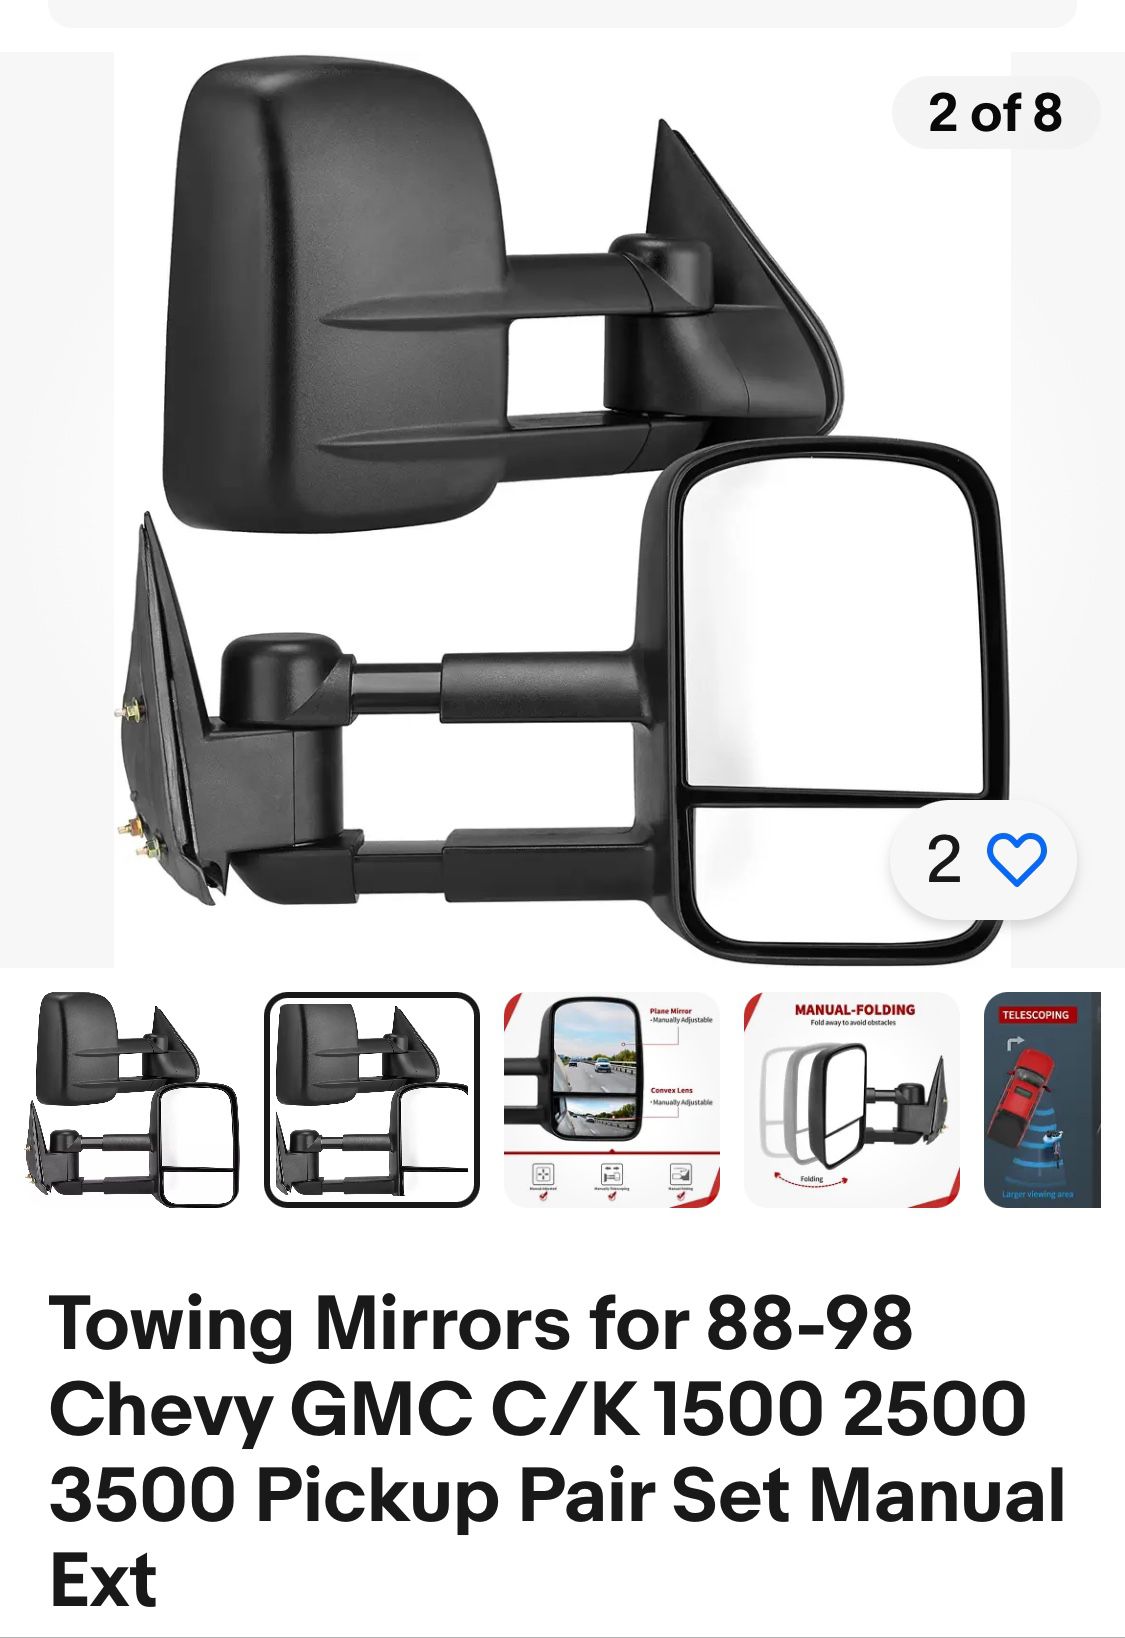 TOWING MIRRORS 88-98 FORD CHEVY GMC